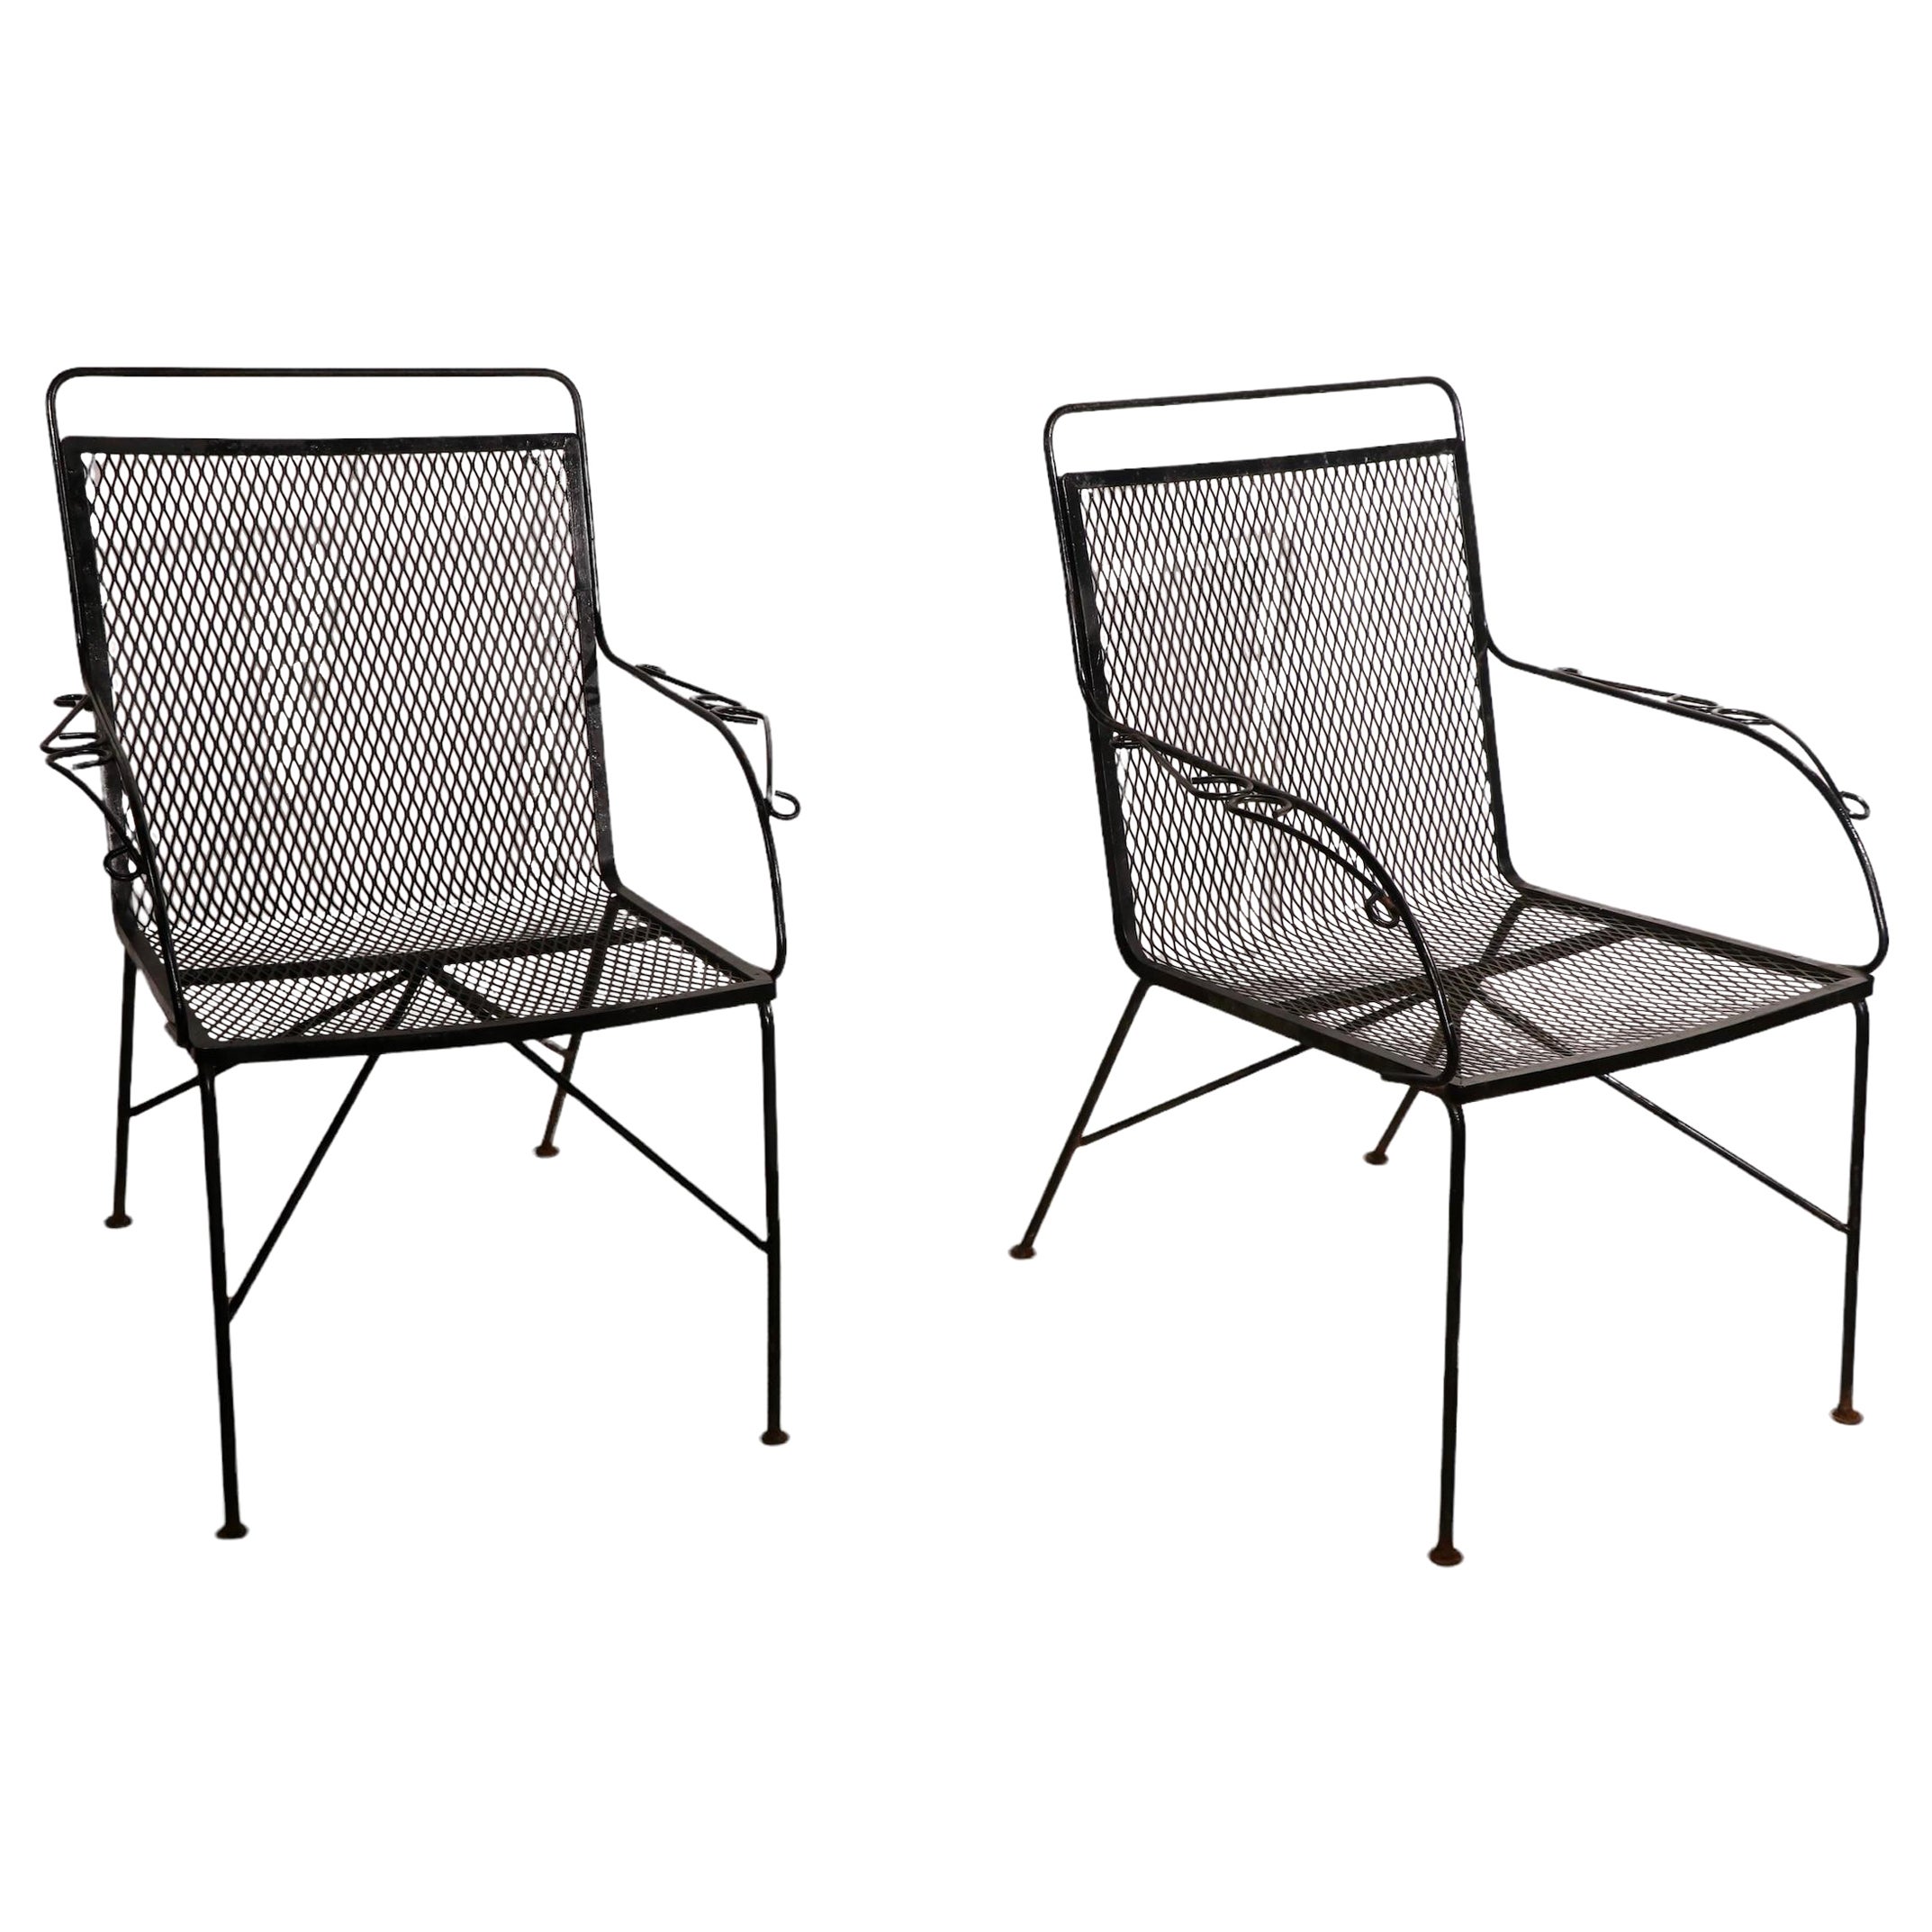 Pr. Mid Century Garden Patio Poolside  Wrought Iron Dining Lounge Arm Chairs